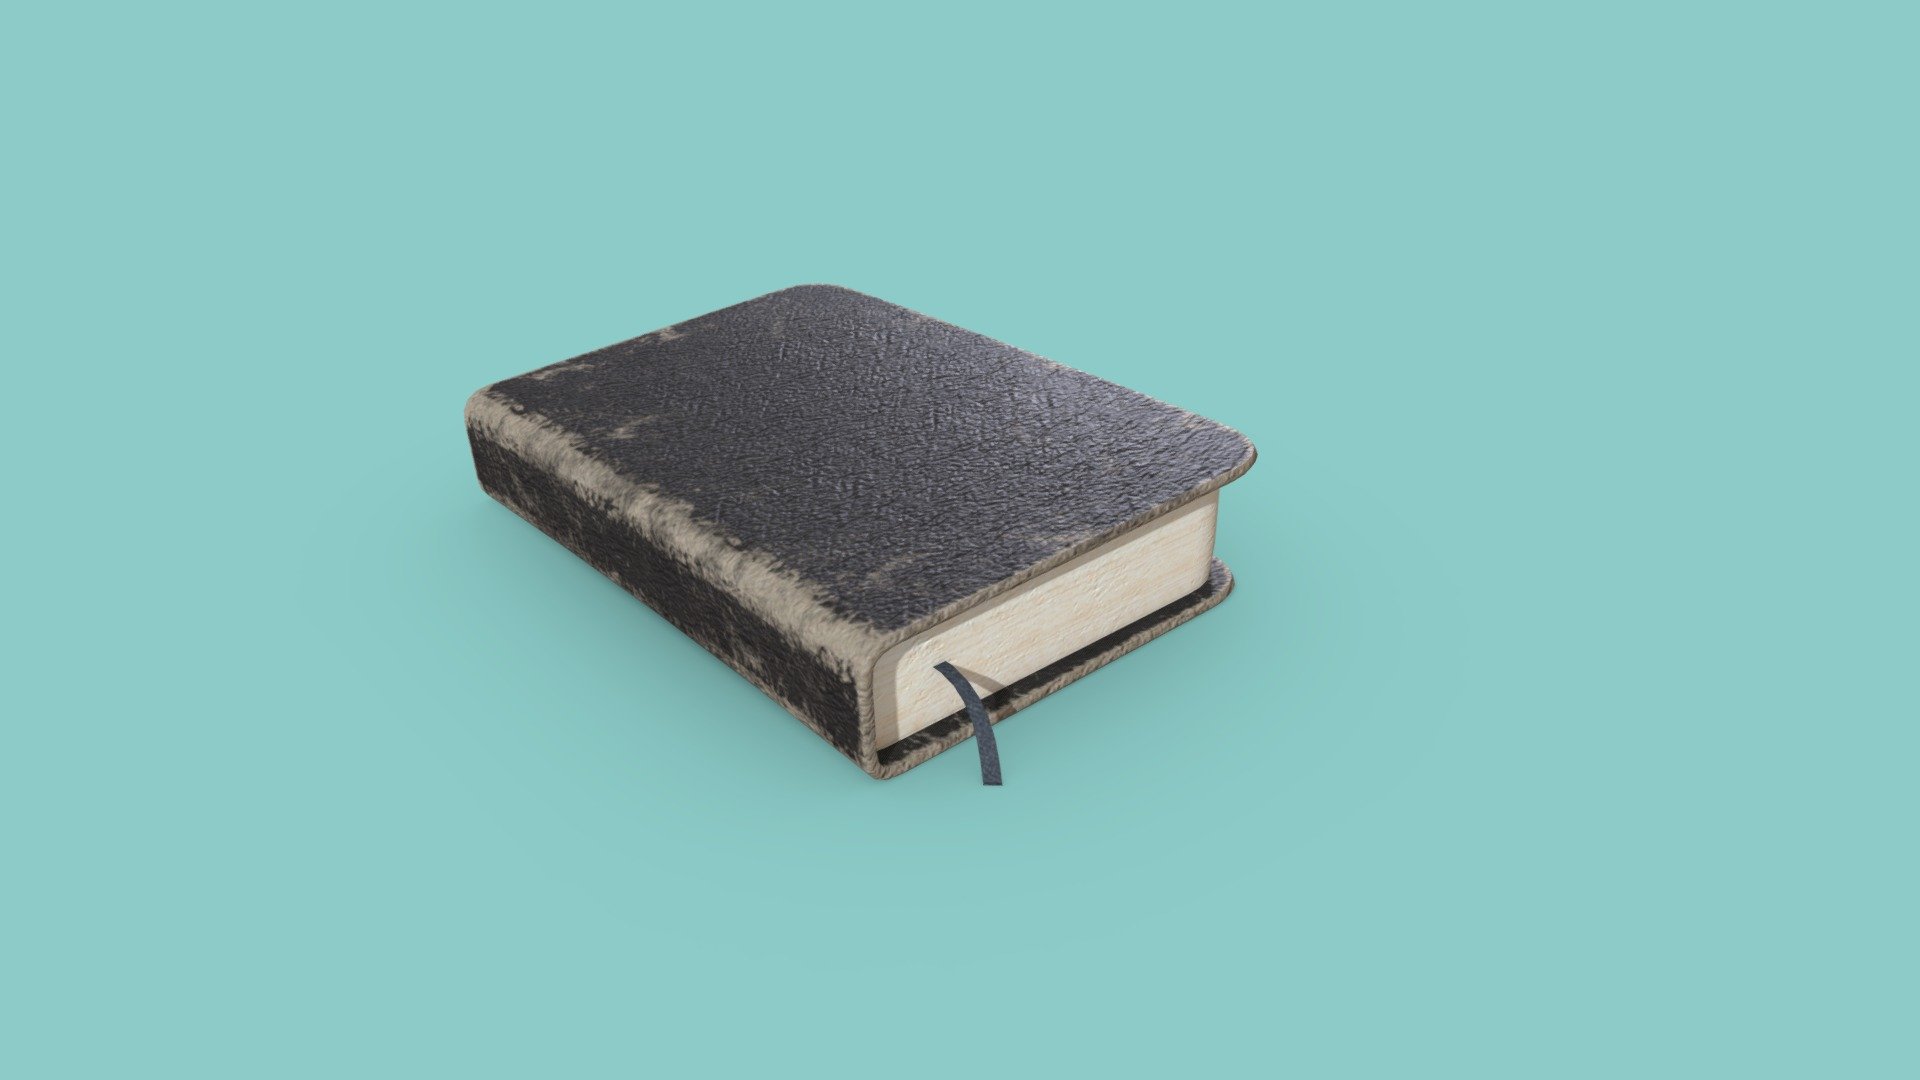 Vintage Prayer Book


Model is low poly.
Model is Game-Ready/VR ready.
Model is UV mapped and unwrapped (non overlapping)
Asset is fully textured, 1024x1024 .png’s. PBR
Model is ready for Unity and Unreal game engines.
File Format: .FBX

Additional zip file contains all the files 3d model